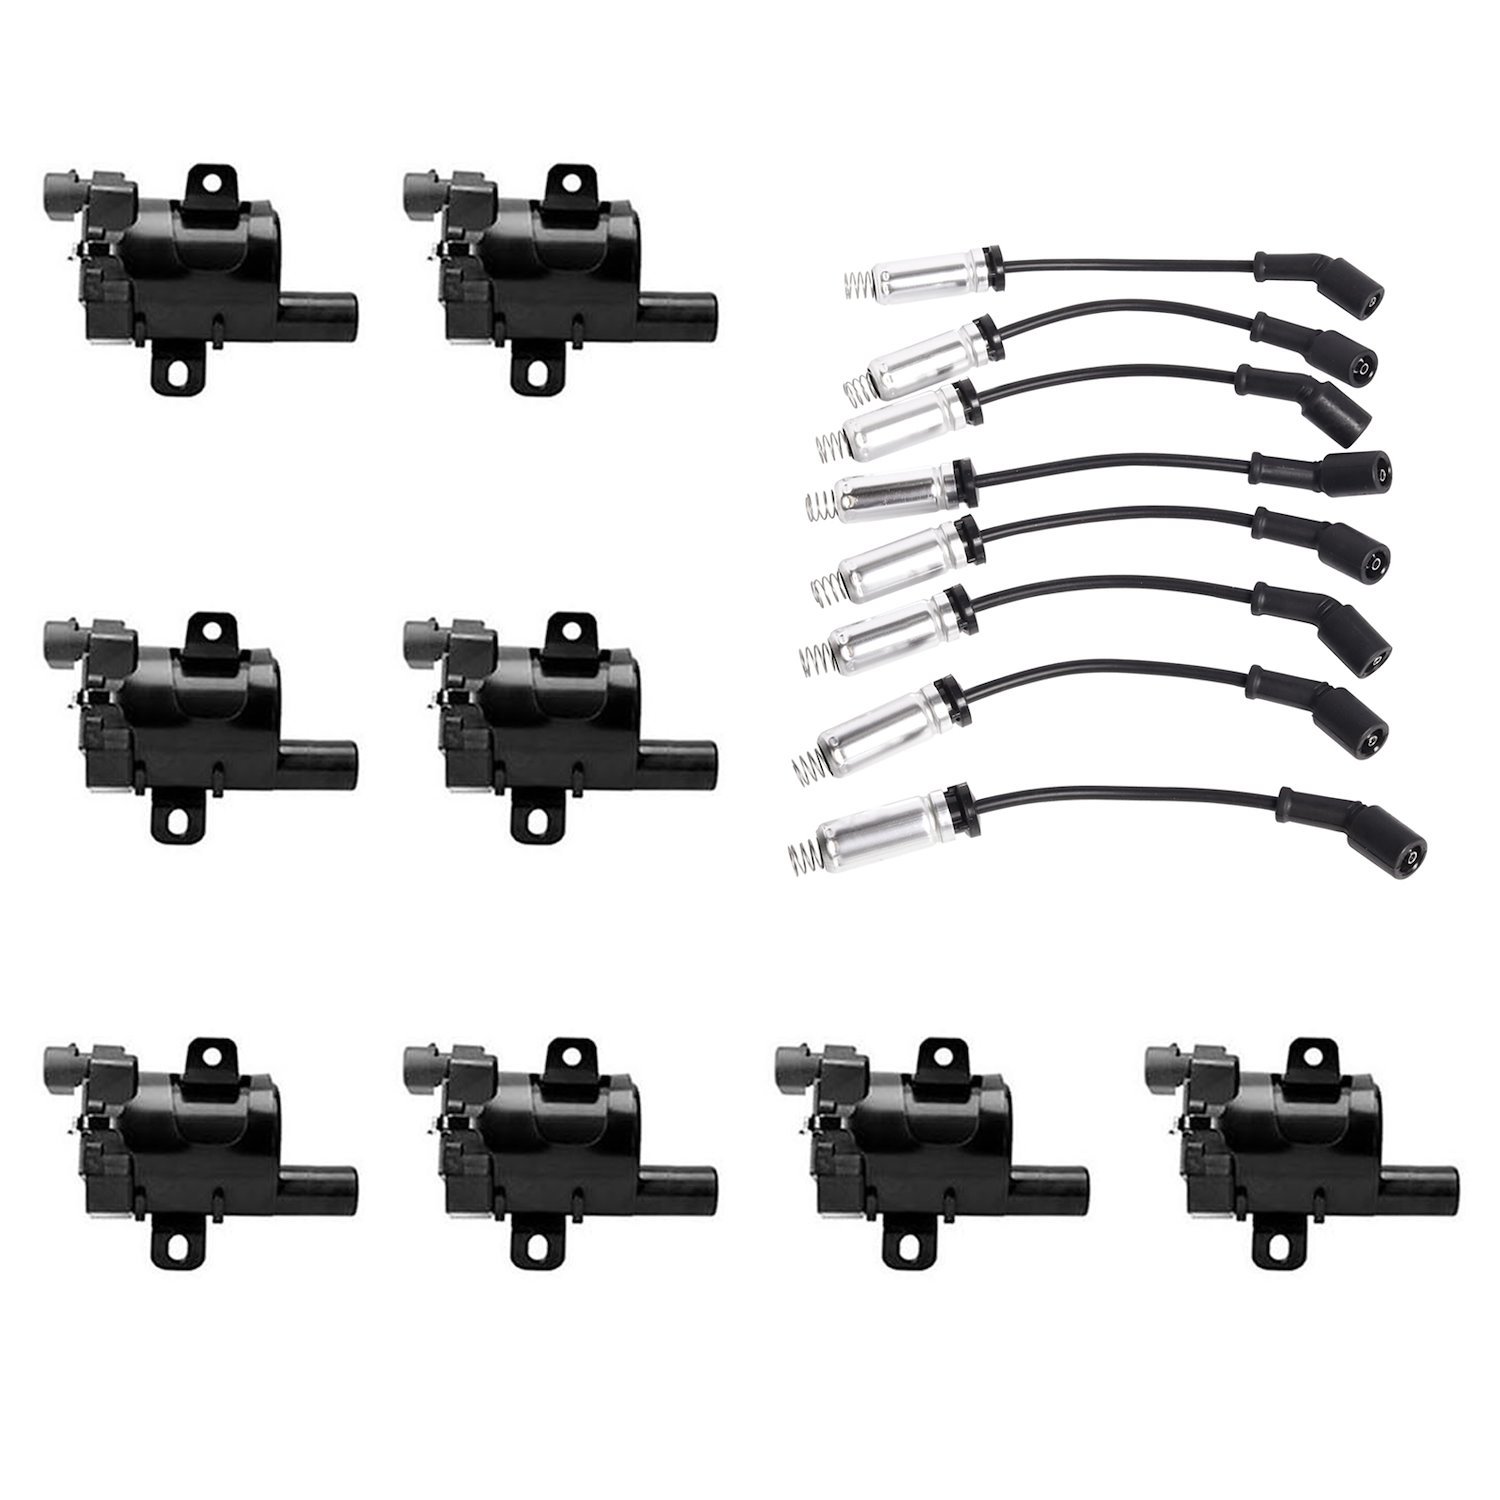 OE Replacement Ignition Coil and Spark Plug Wire Kit, Chevy Silverado 4.8/5.3/6.0L, GMC Sierra Yukon 4.8/5.3/6.0L